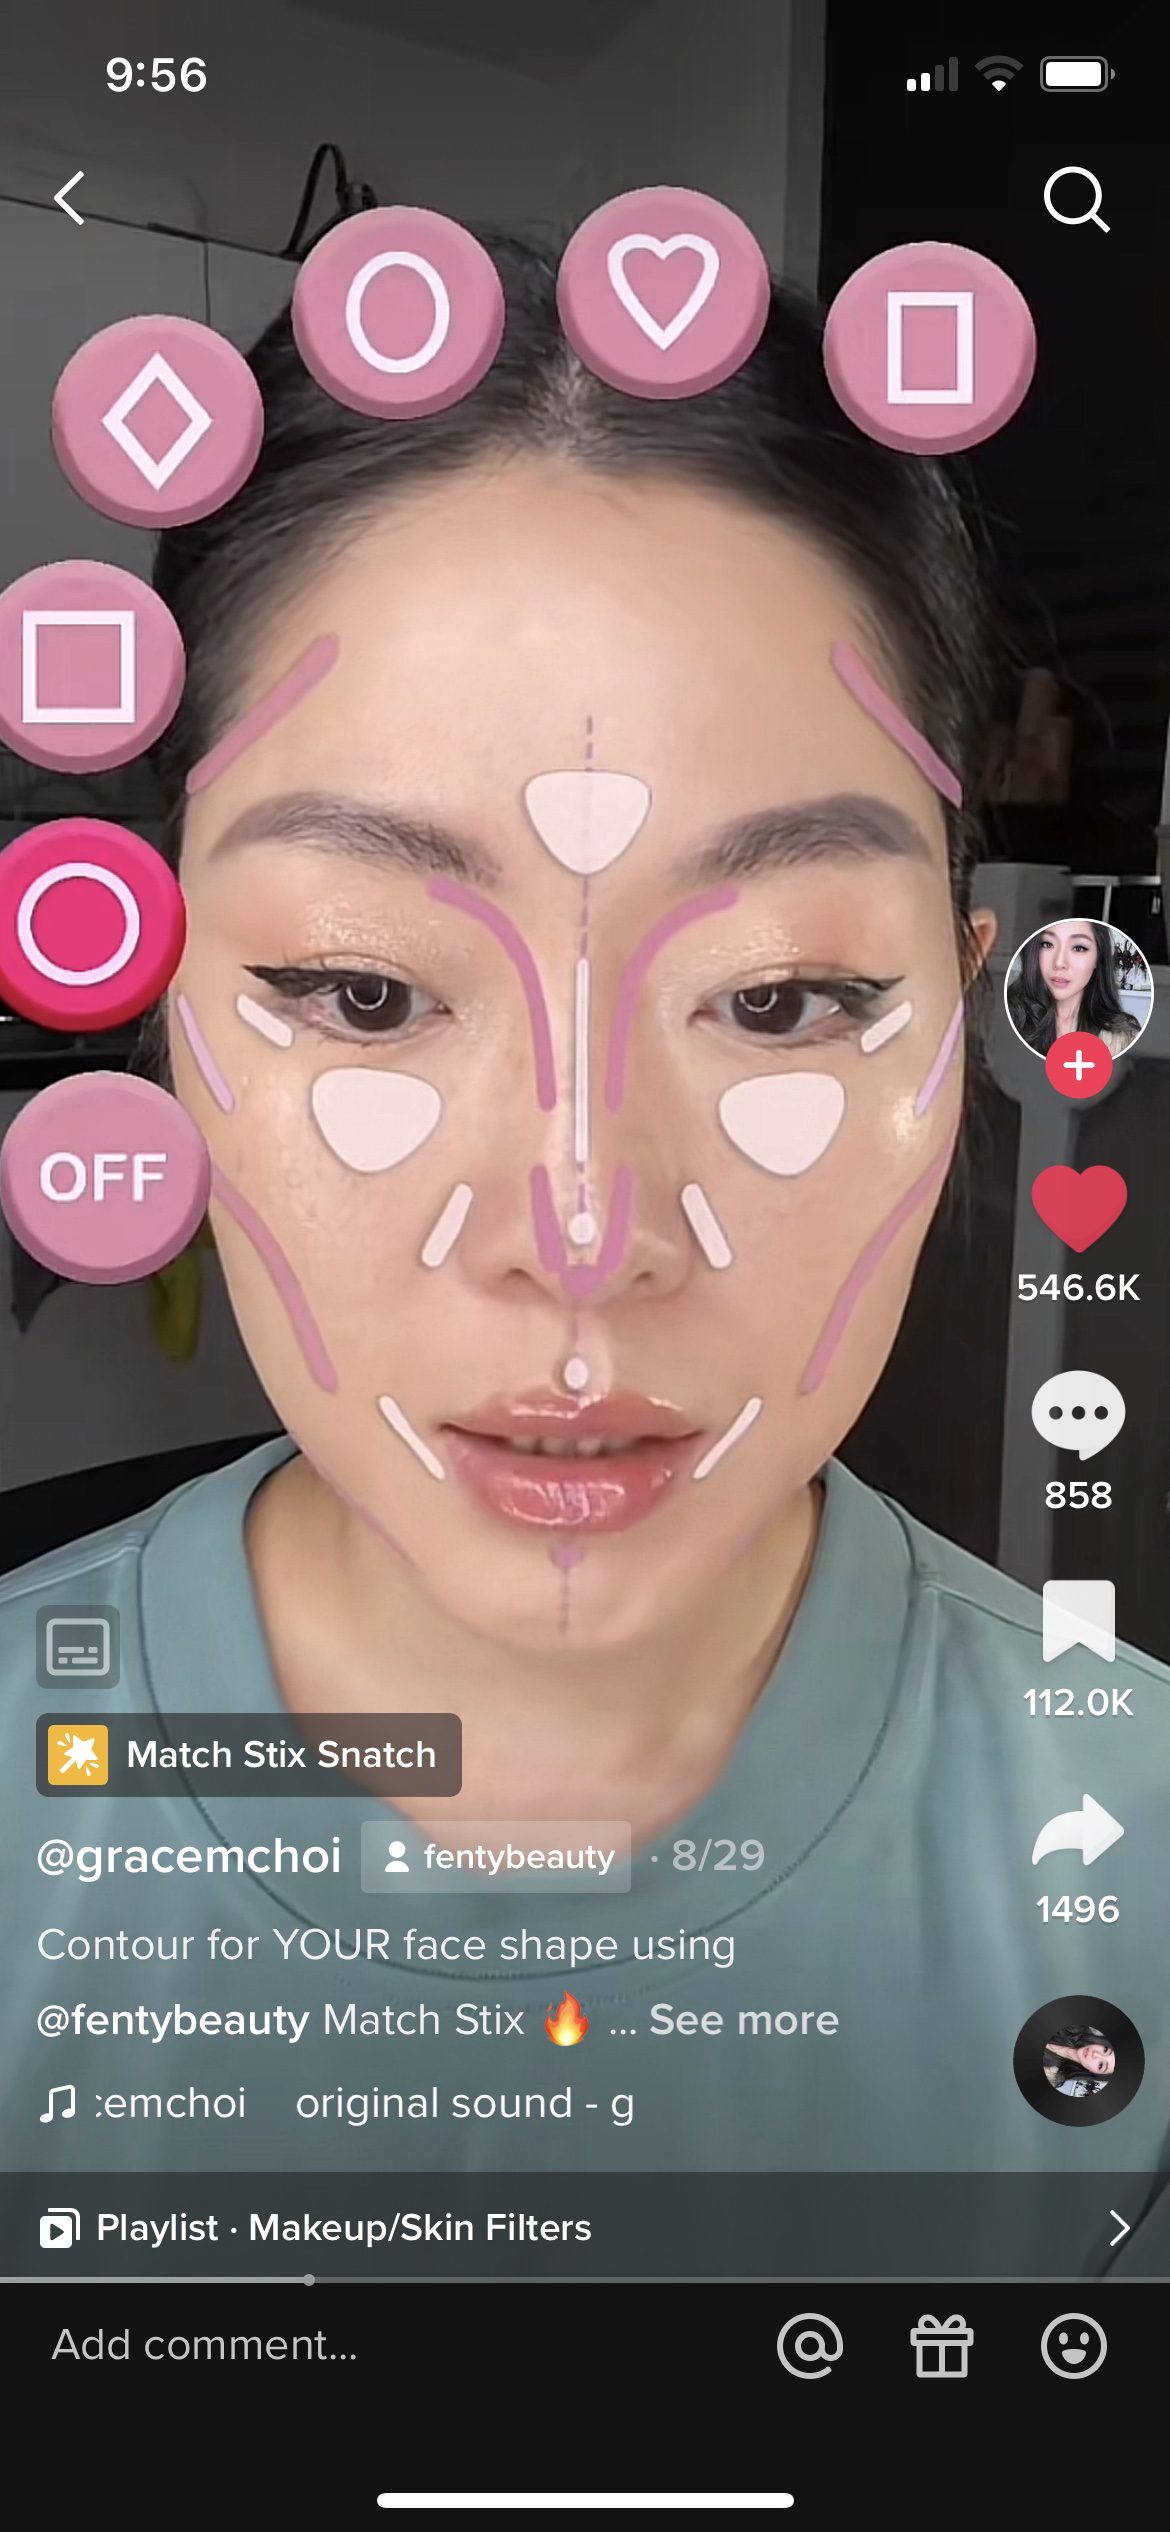 Crazy Contour and Filter Styles on TikTok - The Garnette Report